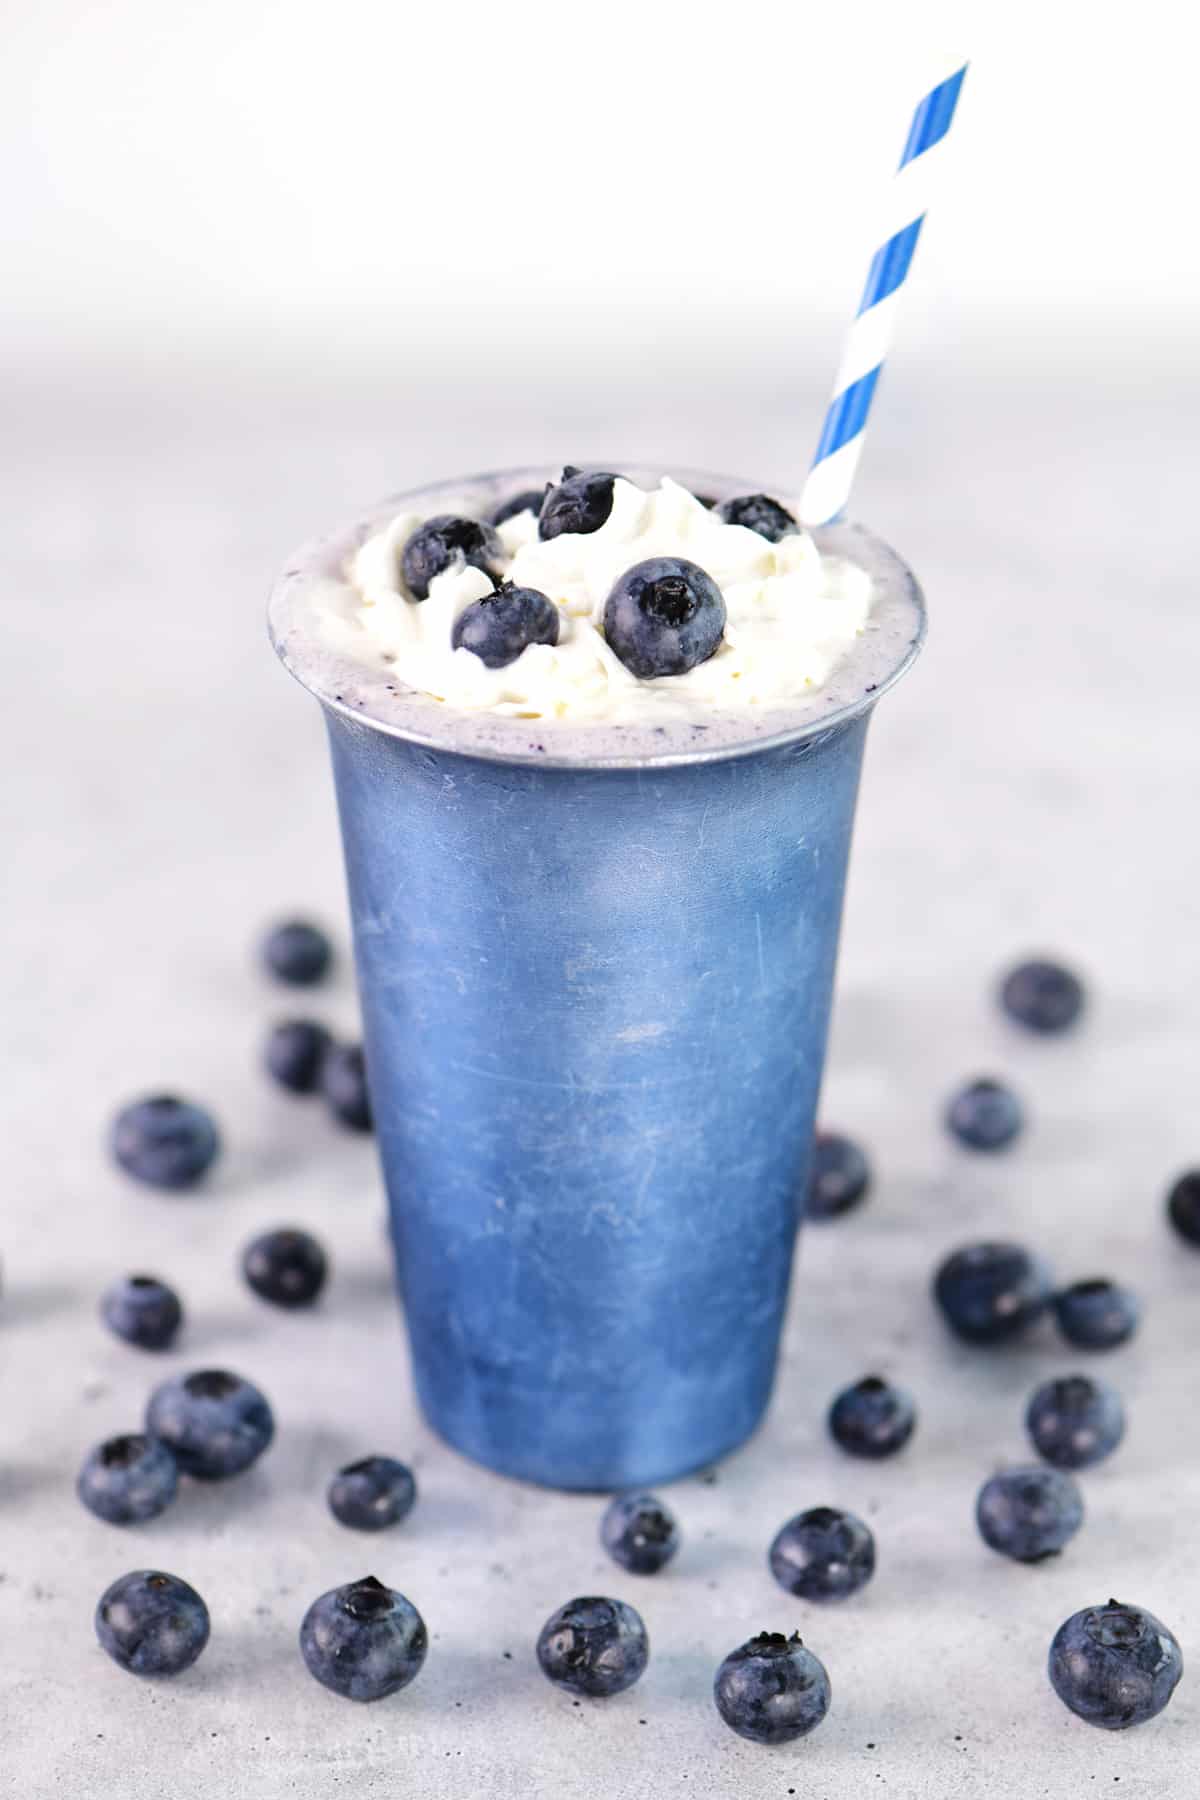 A blueberry milkshake in a blue cup.